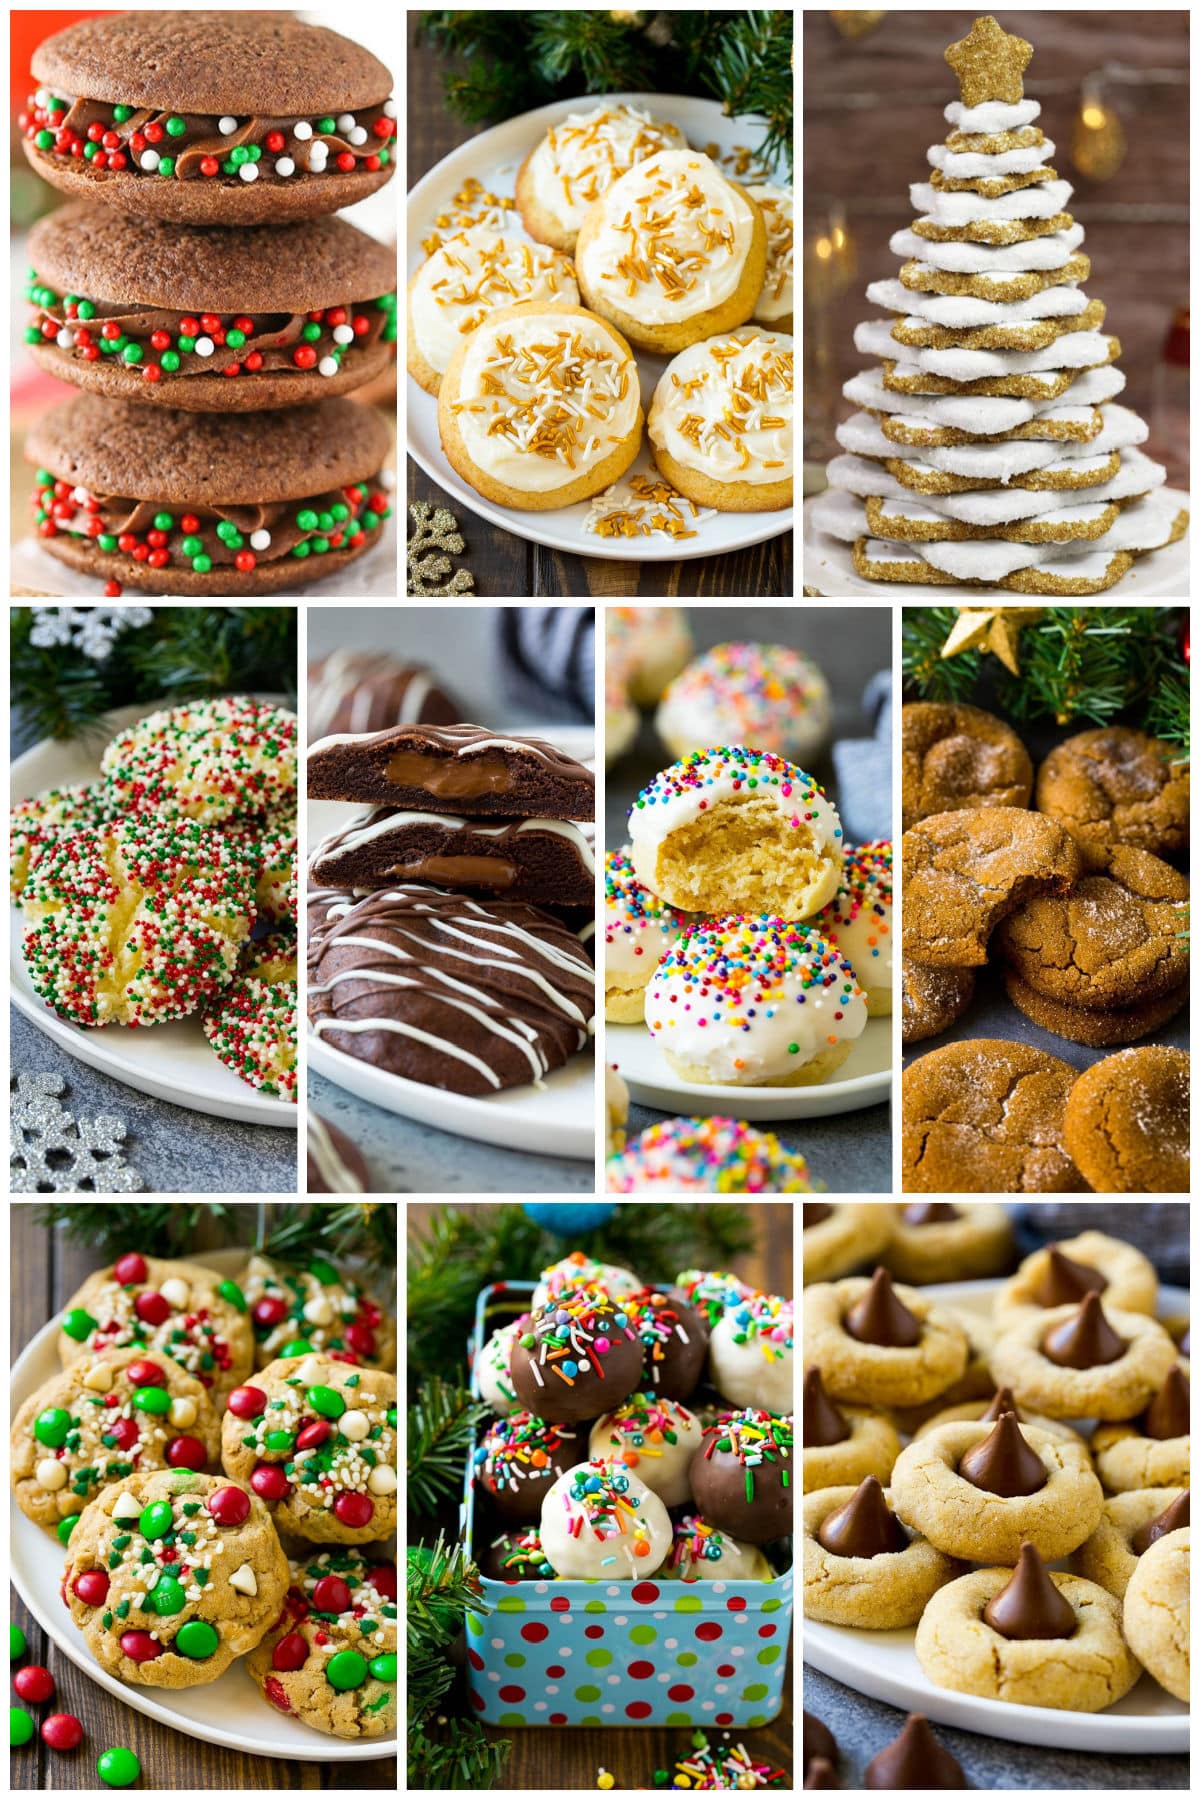 A group of Christmas cookie recipes including peanut butter blossoms, Italian cookies and eggnog cookies.